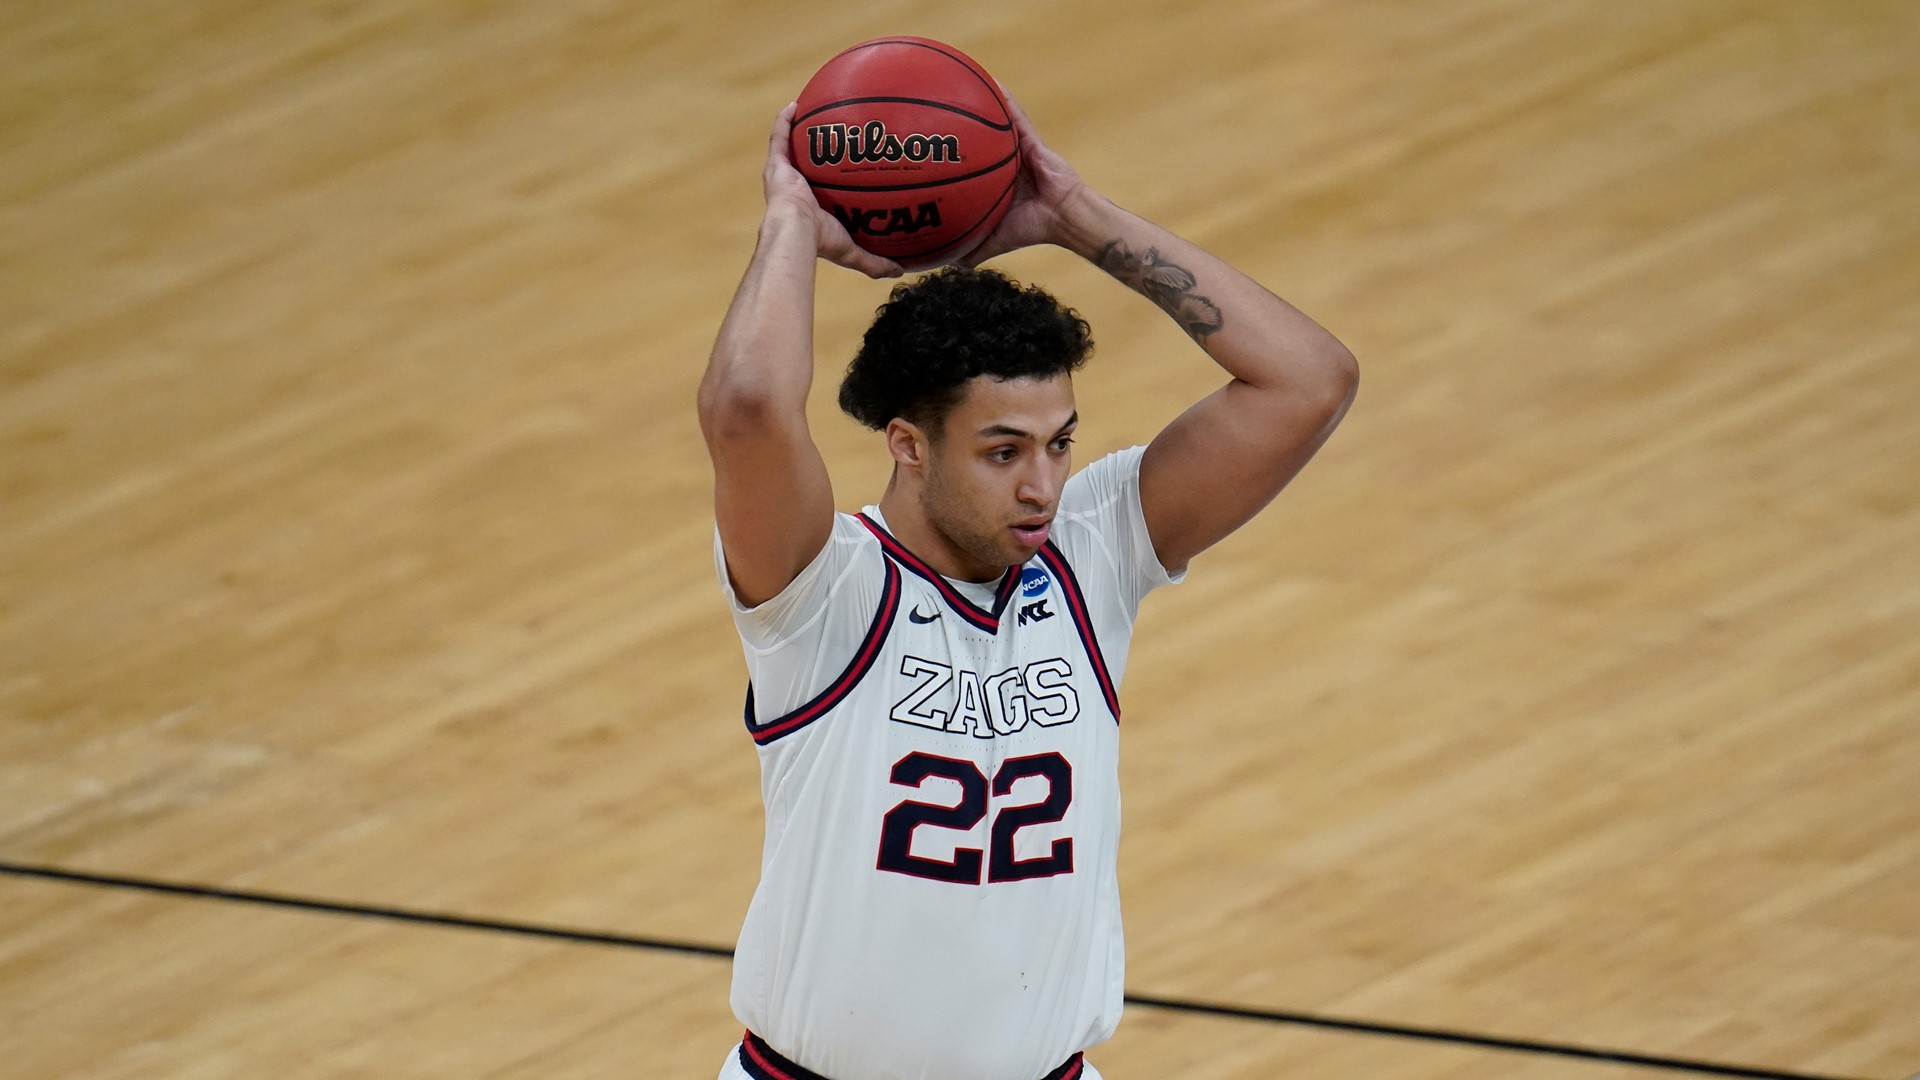 Who is staying? Who is going? Who is coming in? The Gonzaga roster will lose some key players going into next season but should still be loaded with talent.